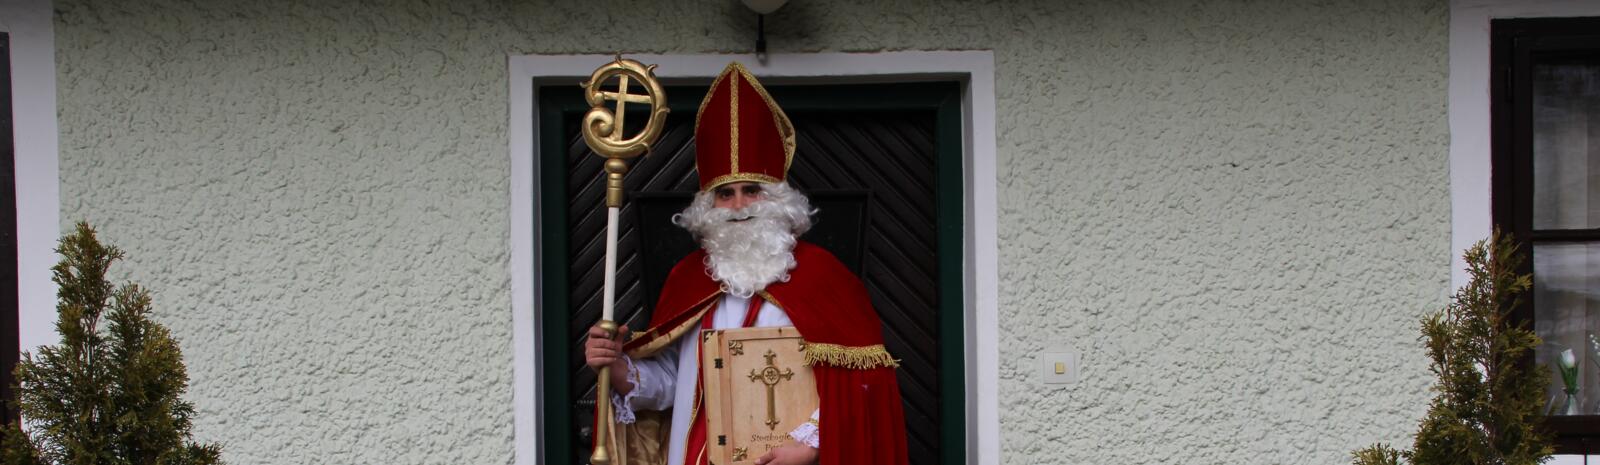 St. Nicholas moves from house to house